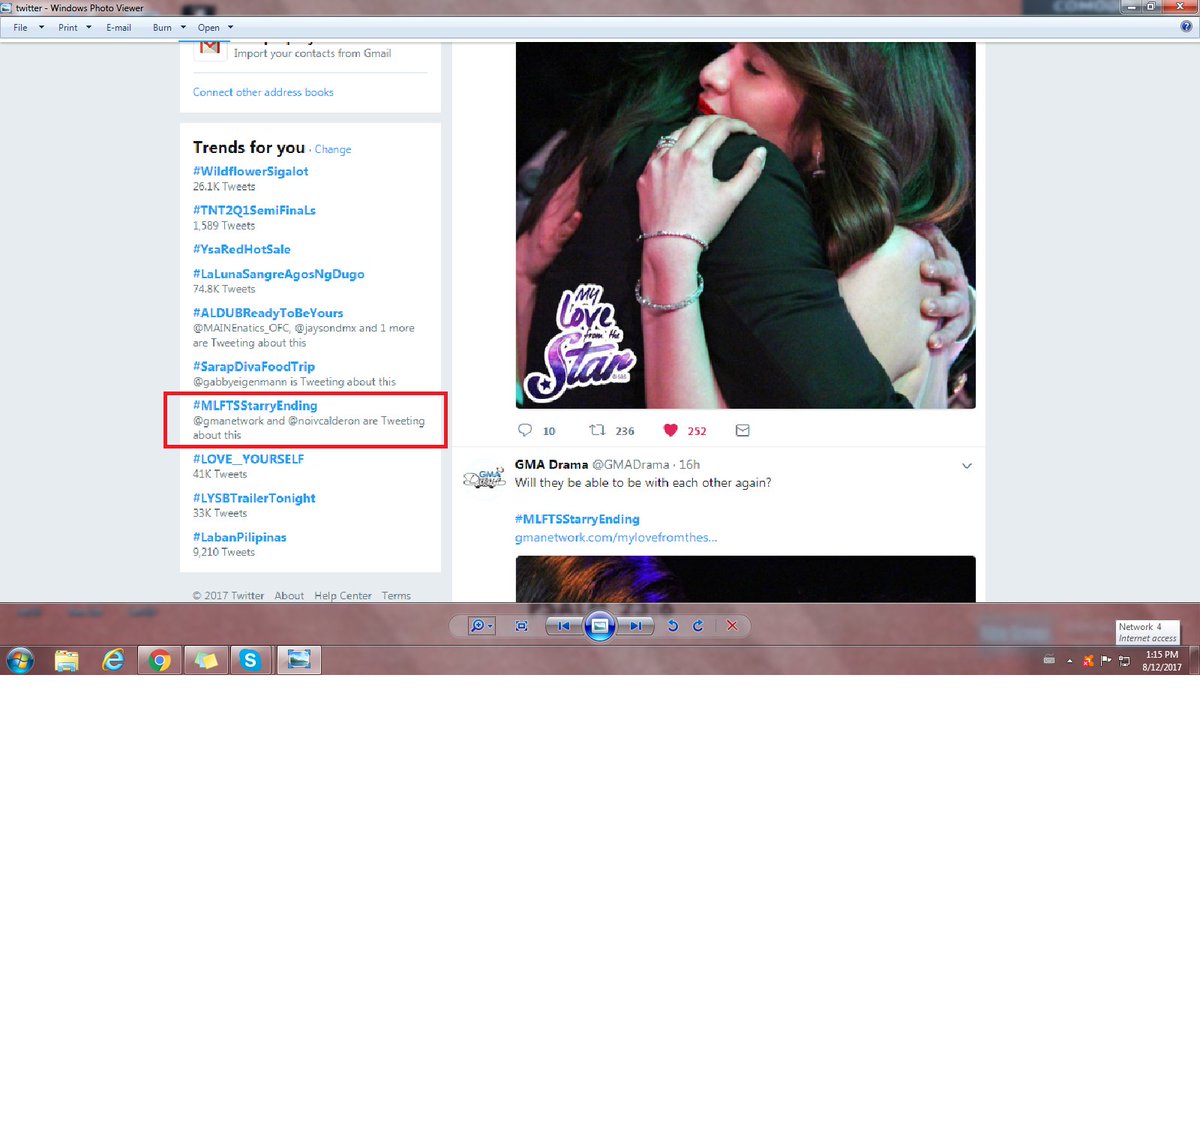 So, it's not just me then! Buong bayan may hang-over! Still trending on a Saturday! *love* #MLFTSStarryEnding